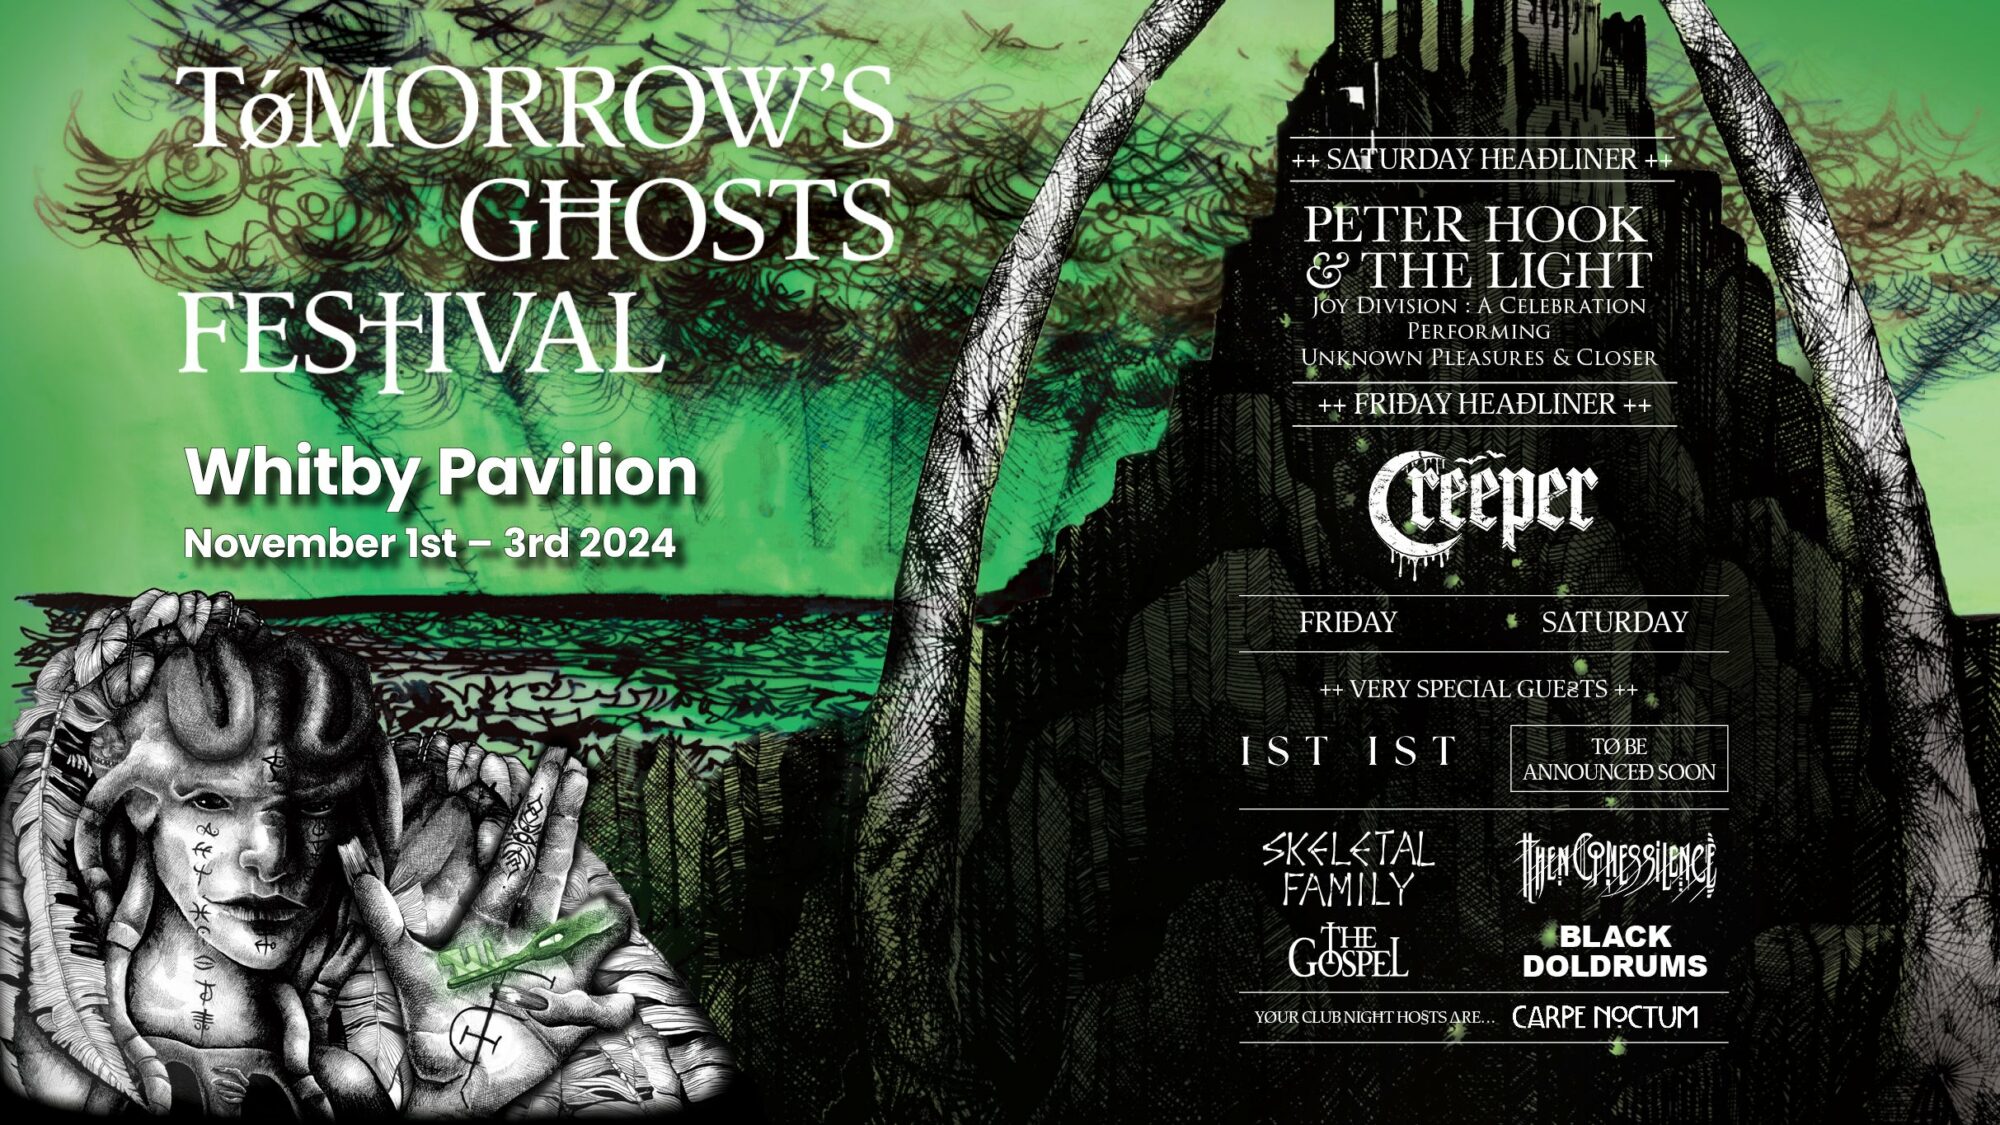 Image name Tomorrows Ghosts Festival Friday Night Ticket at Whitby Pavilion Northern Lights Suite Whitby the 1 image from the post Tomorrows Ghosts Festival Saturday Night Ticket at Whitby Pavilion Northern Lights Suite, Whitby in Yorkshire.com.